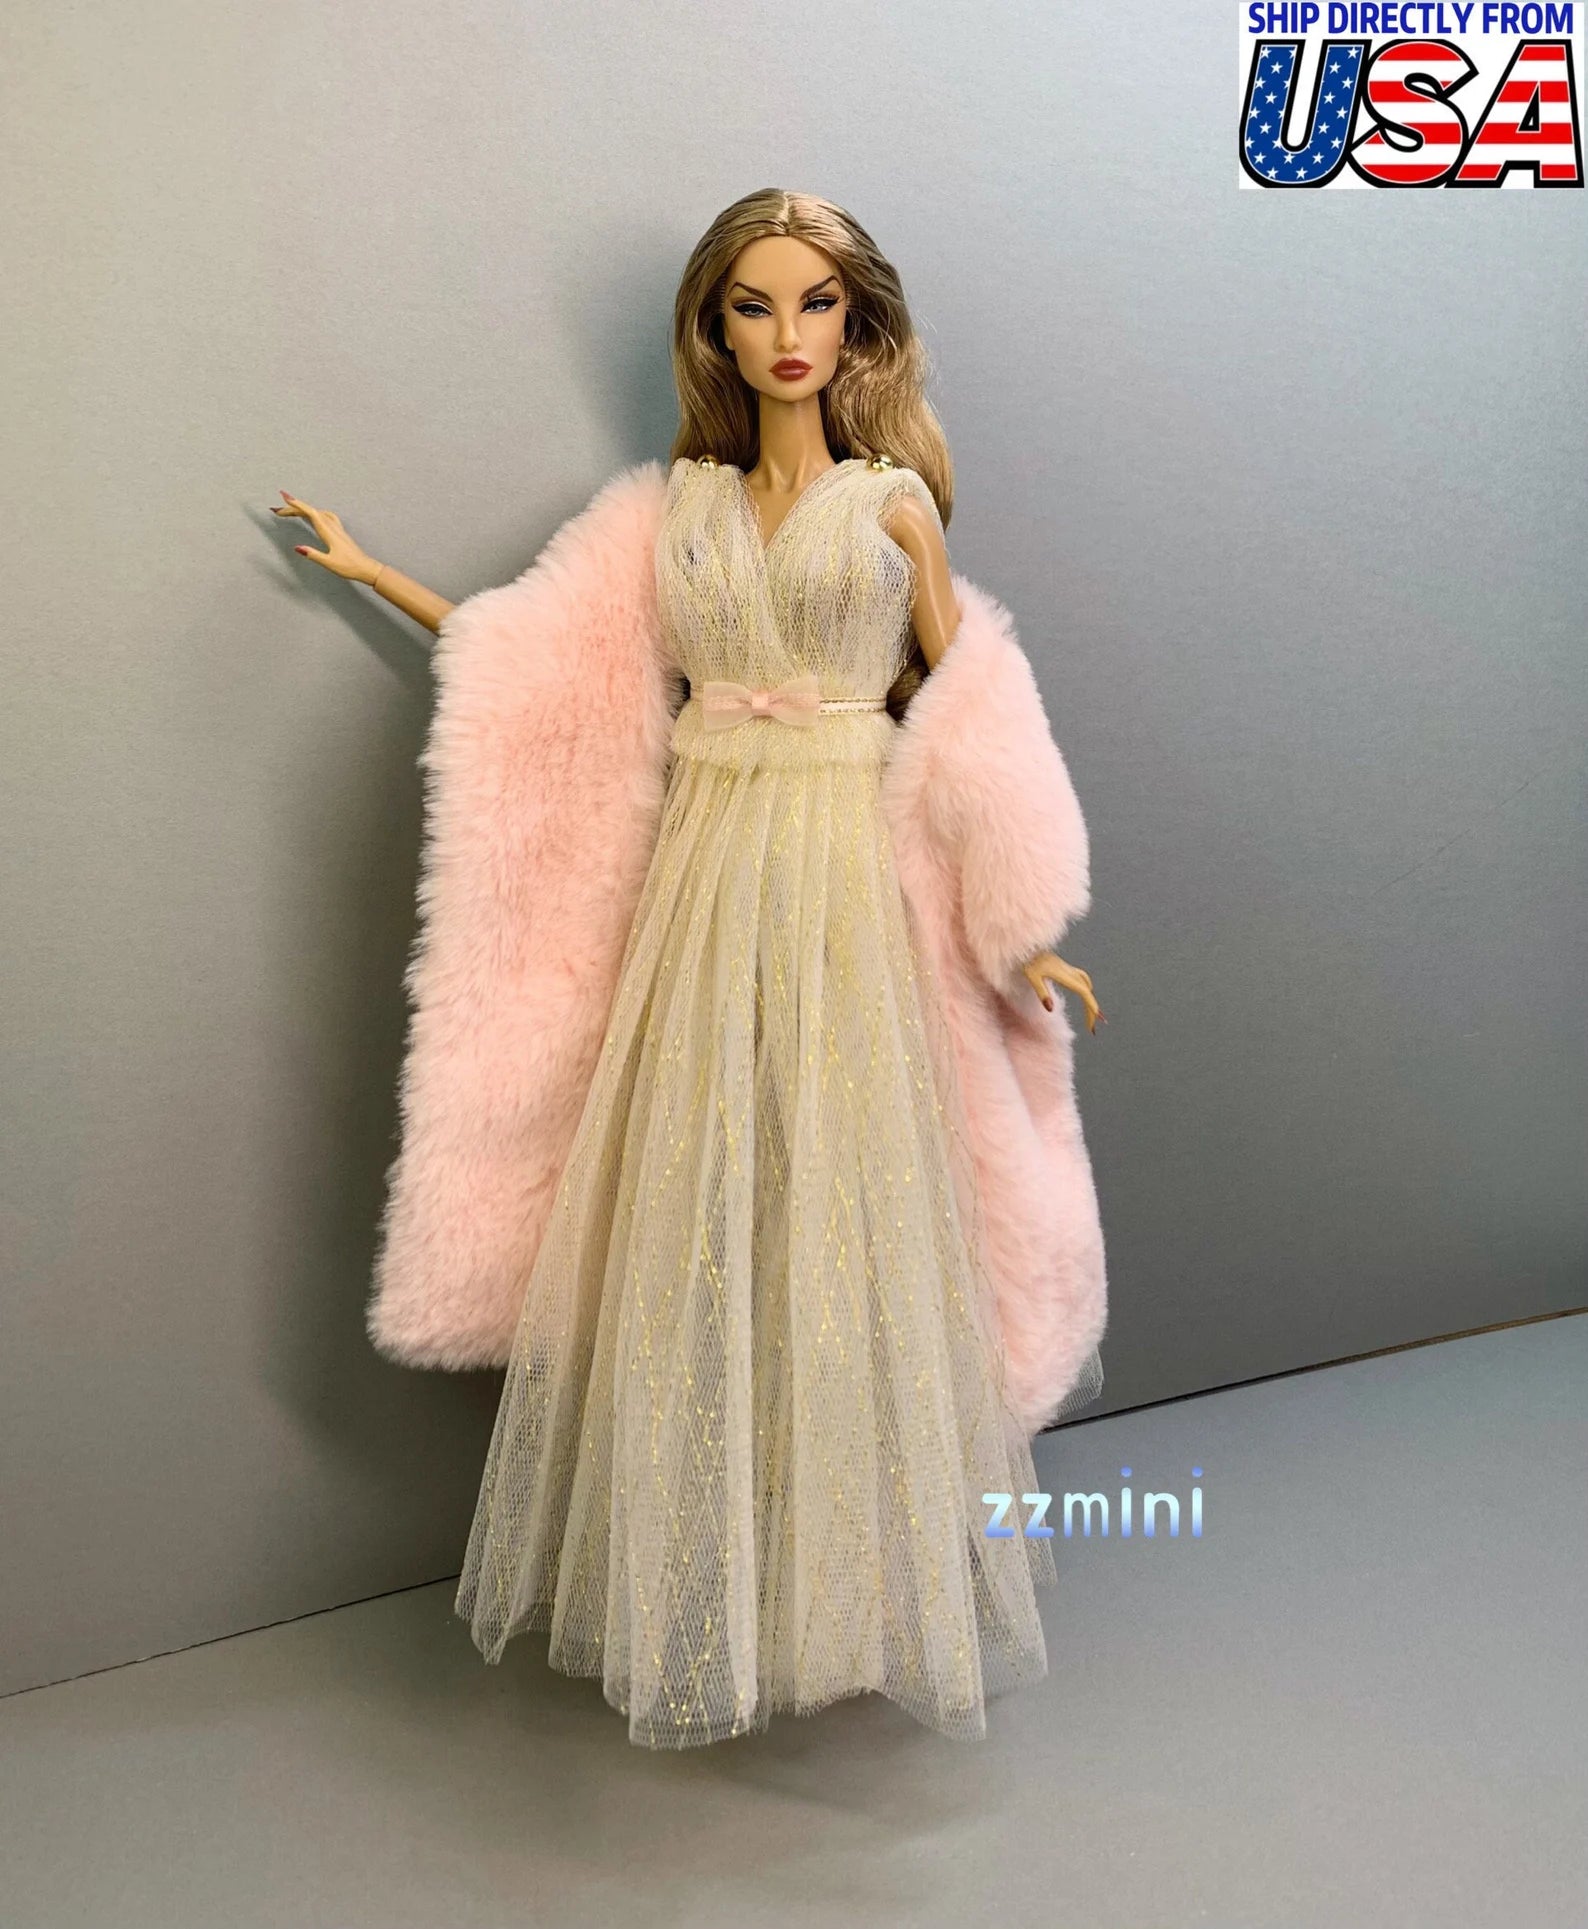 5PCS Fashion Doll Dress Classical Evening Party Dress Clothes Handmade For 11.5" Doll